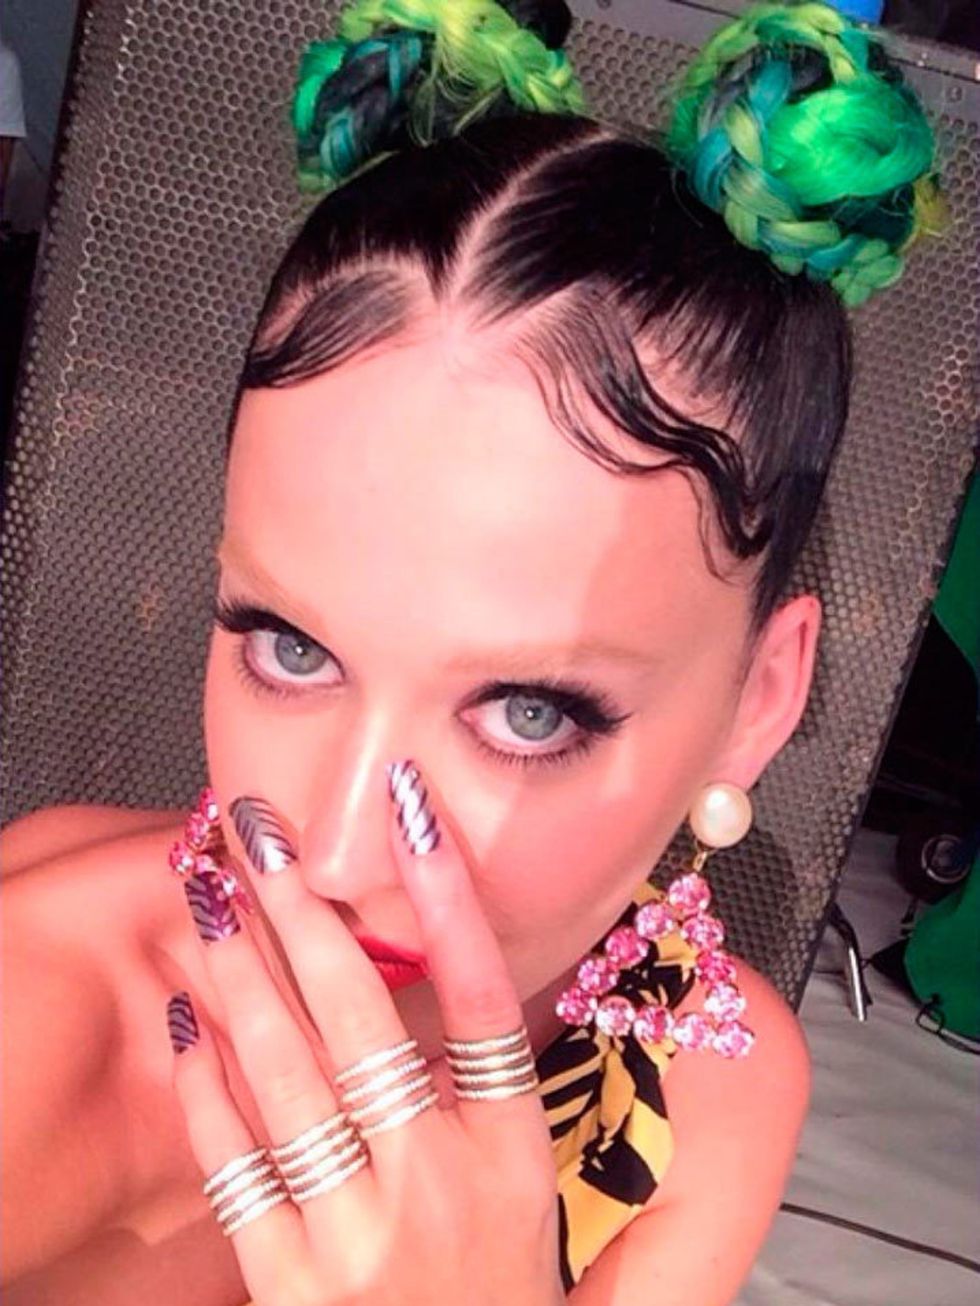 <p>Who: <a href="http://www.elleuk.com/fashion/celebrity-style/katy-perry">Katy Perry</a></p>

<p>What: Bleached brows</p>

<p>Rebel factor: Once upon a time this wouldve induced parental gulps of distress, but since Katy, Miley, Kendall and Kim made the